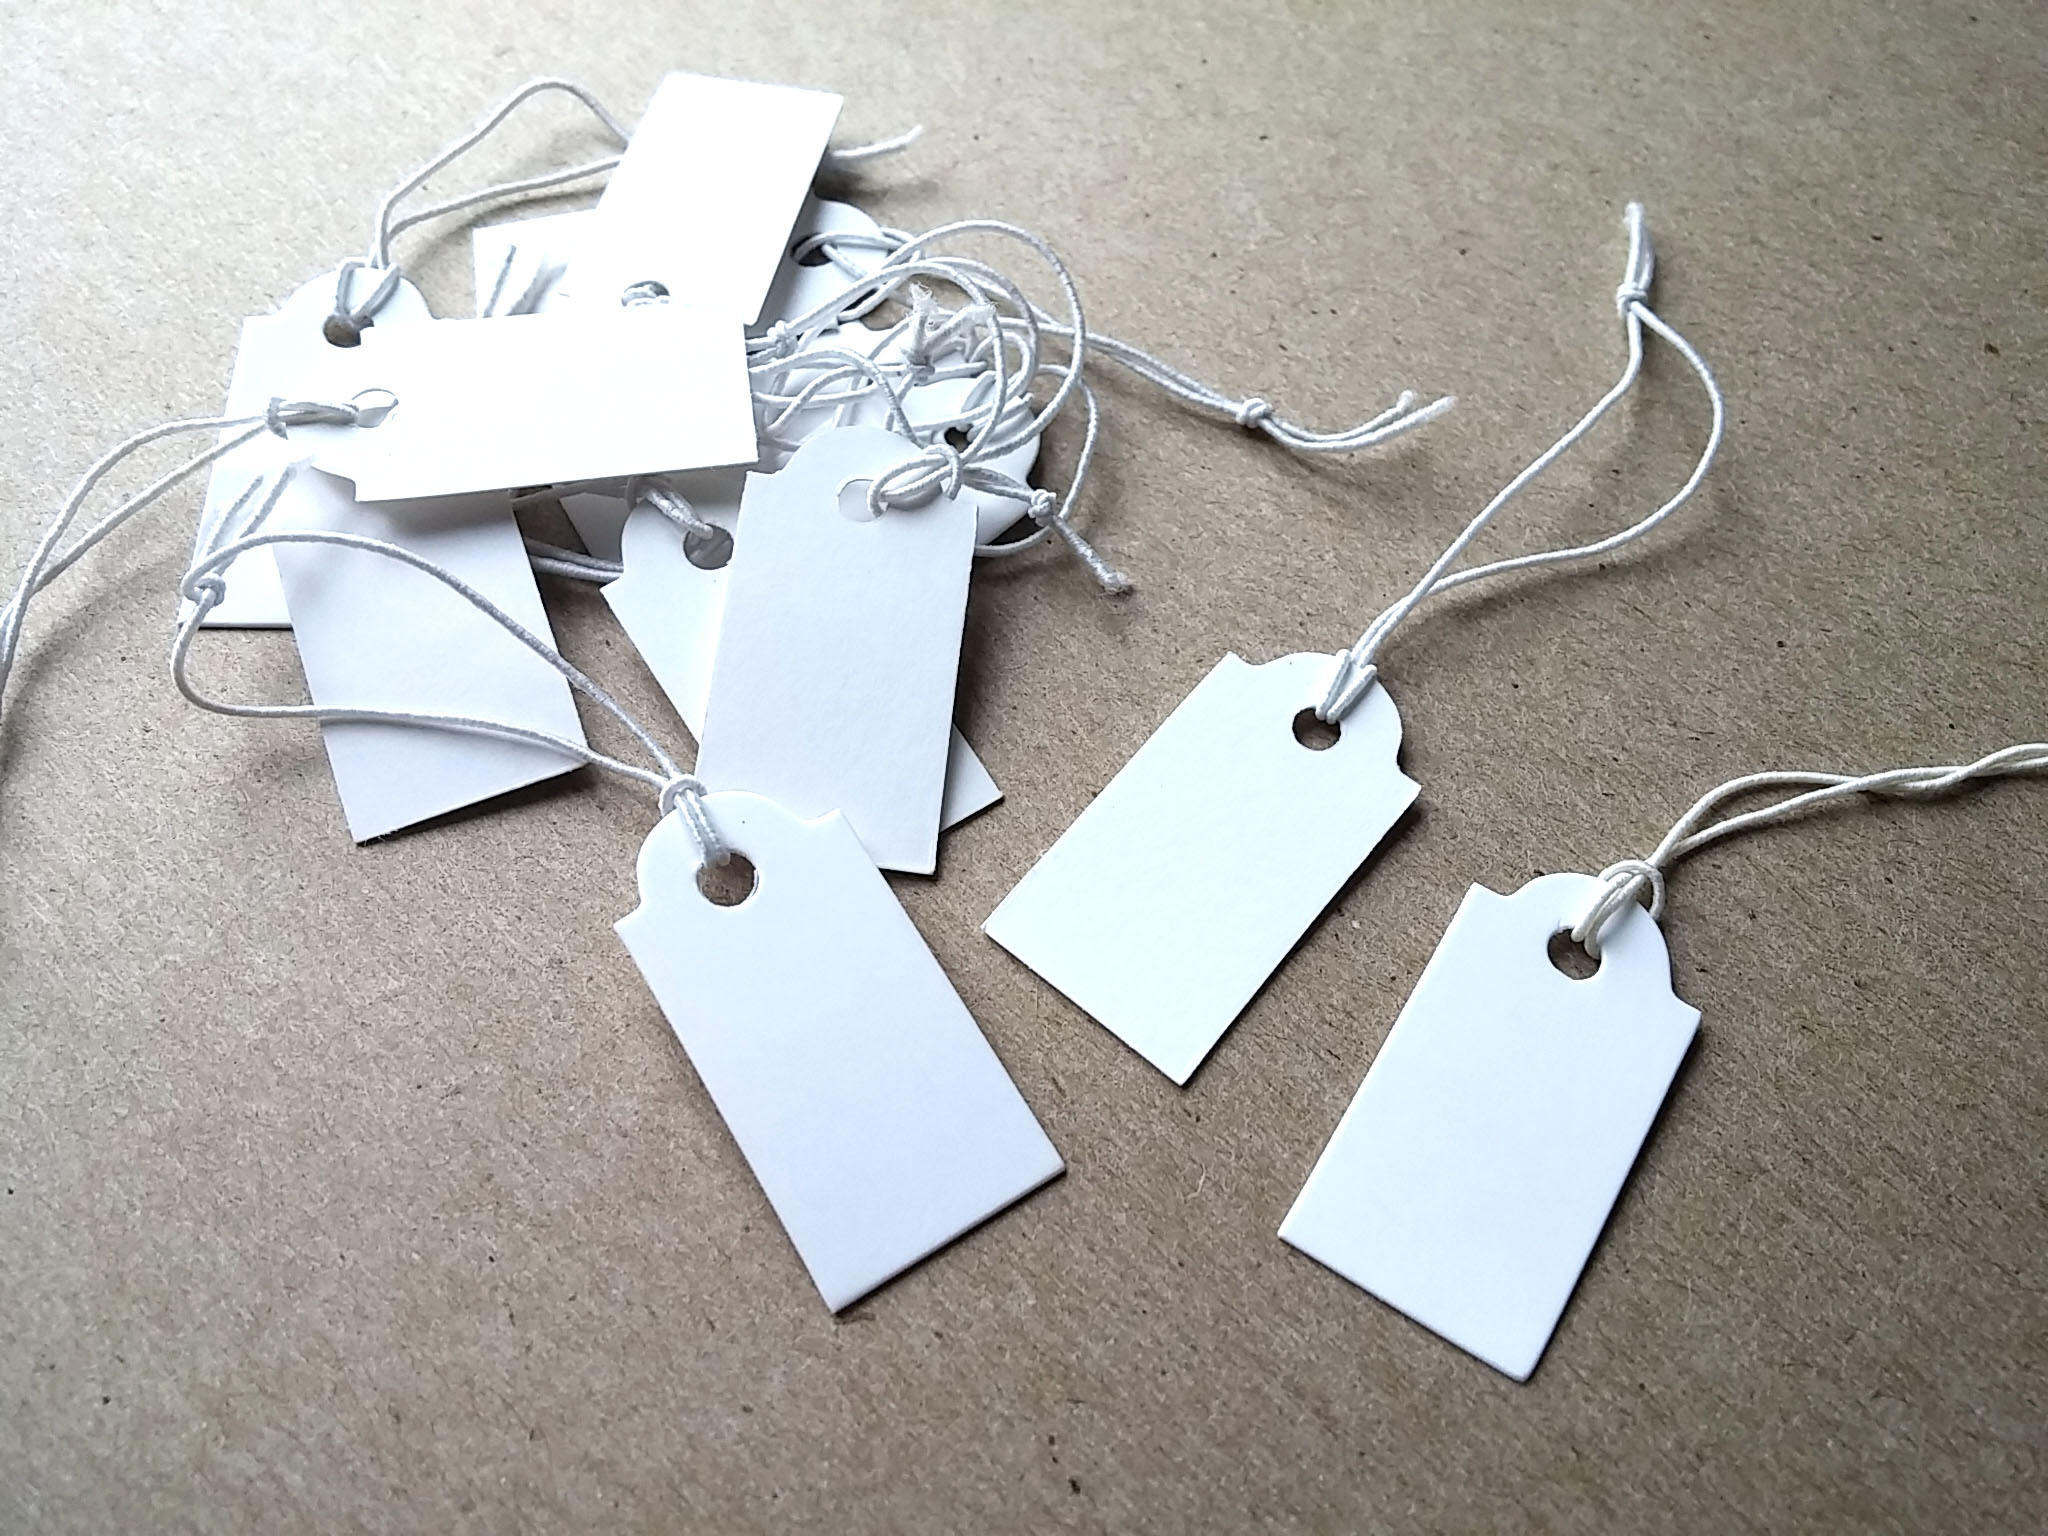 Jewelry price tags - Blank white rectangular tags - Set of 50